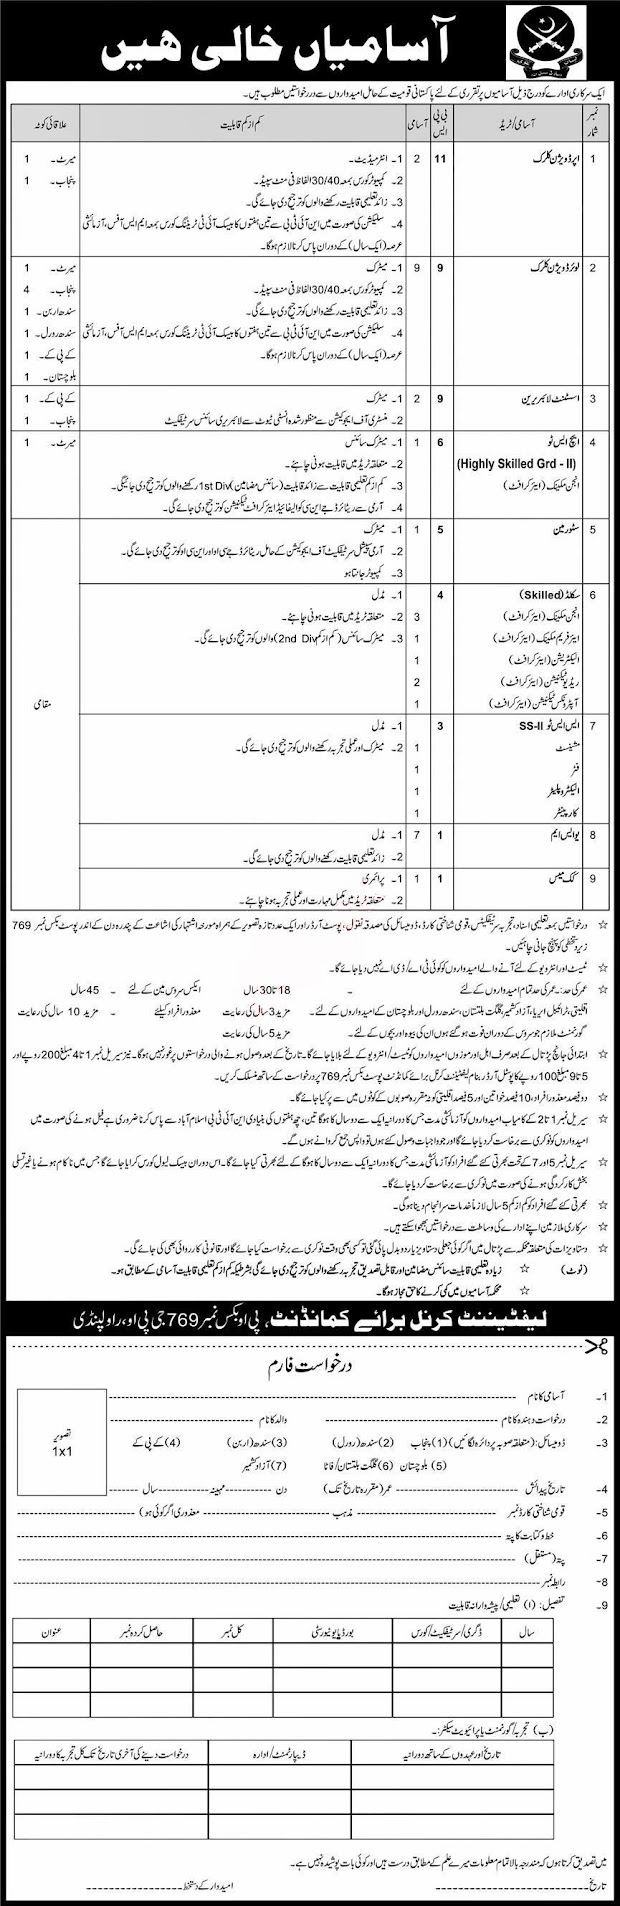 LDC, UDC, Assistant and Storeman Jobs in Pak Army